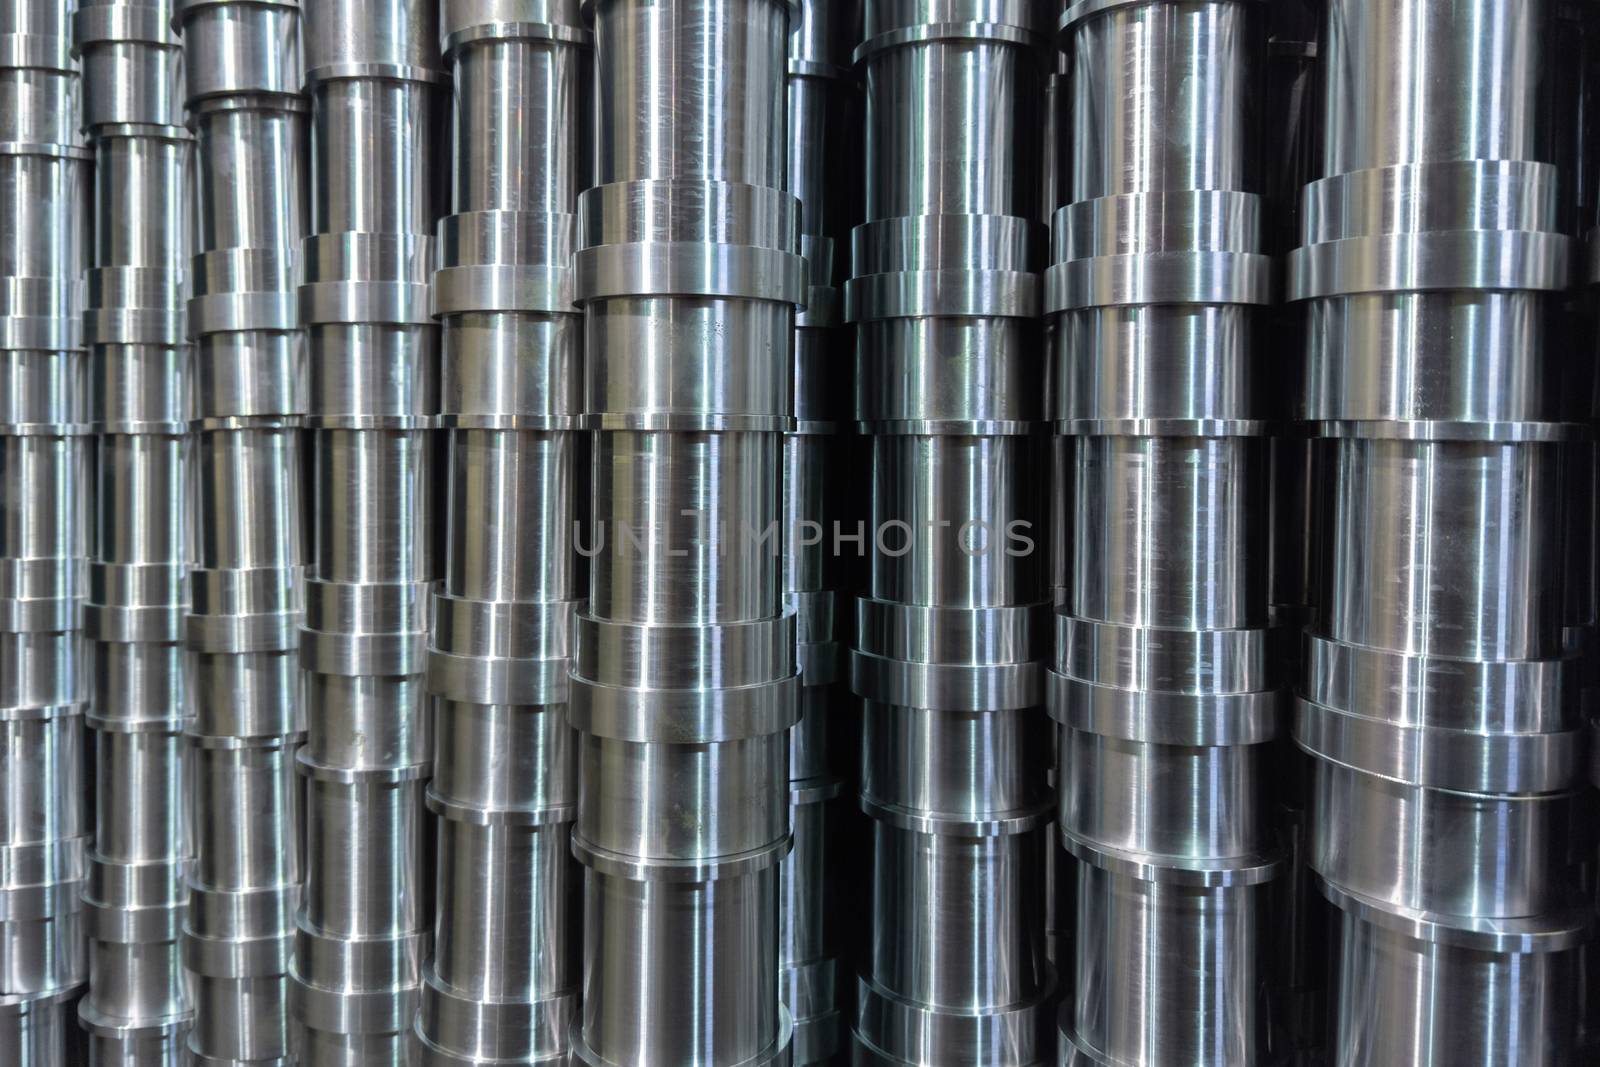 abstract industrial shiny steel production stack full frame background with cnc machined pipes - selective focus and lens blur technique by z1b